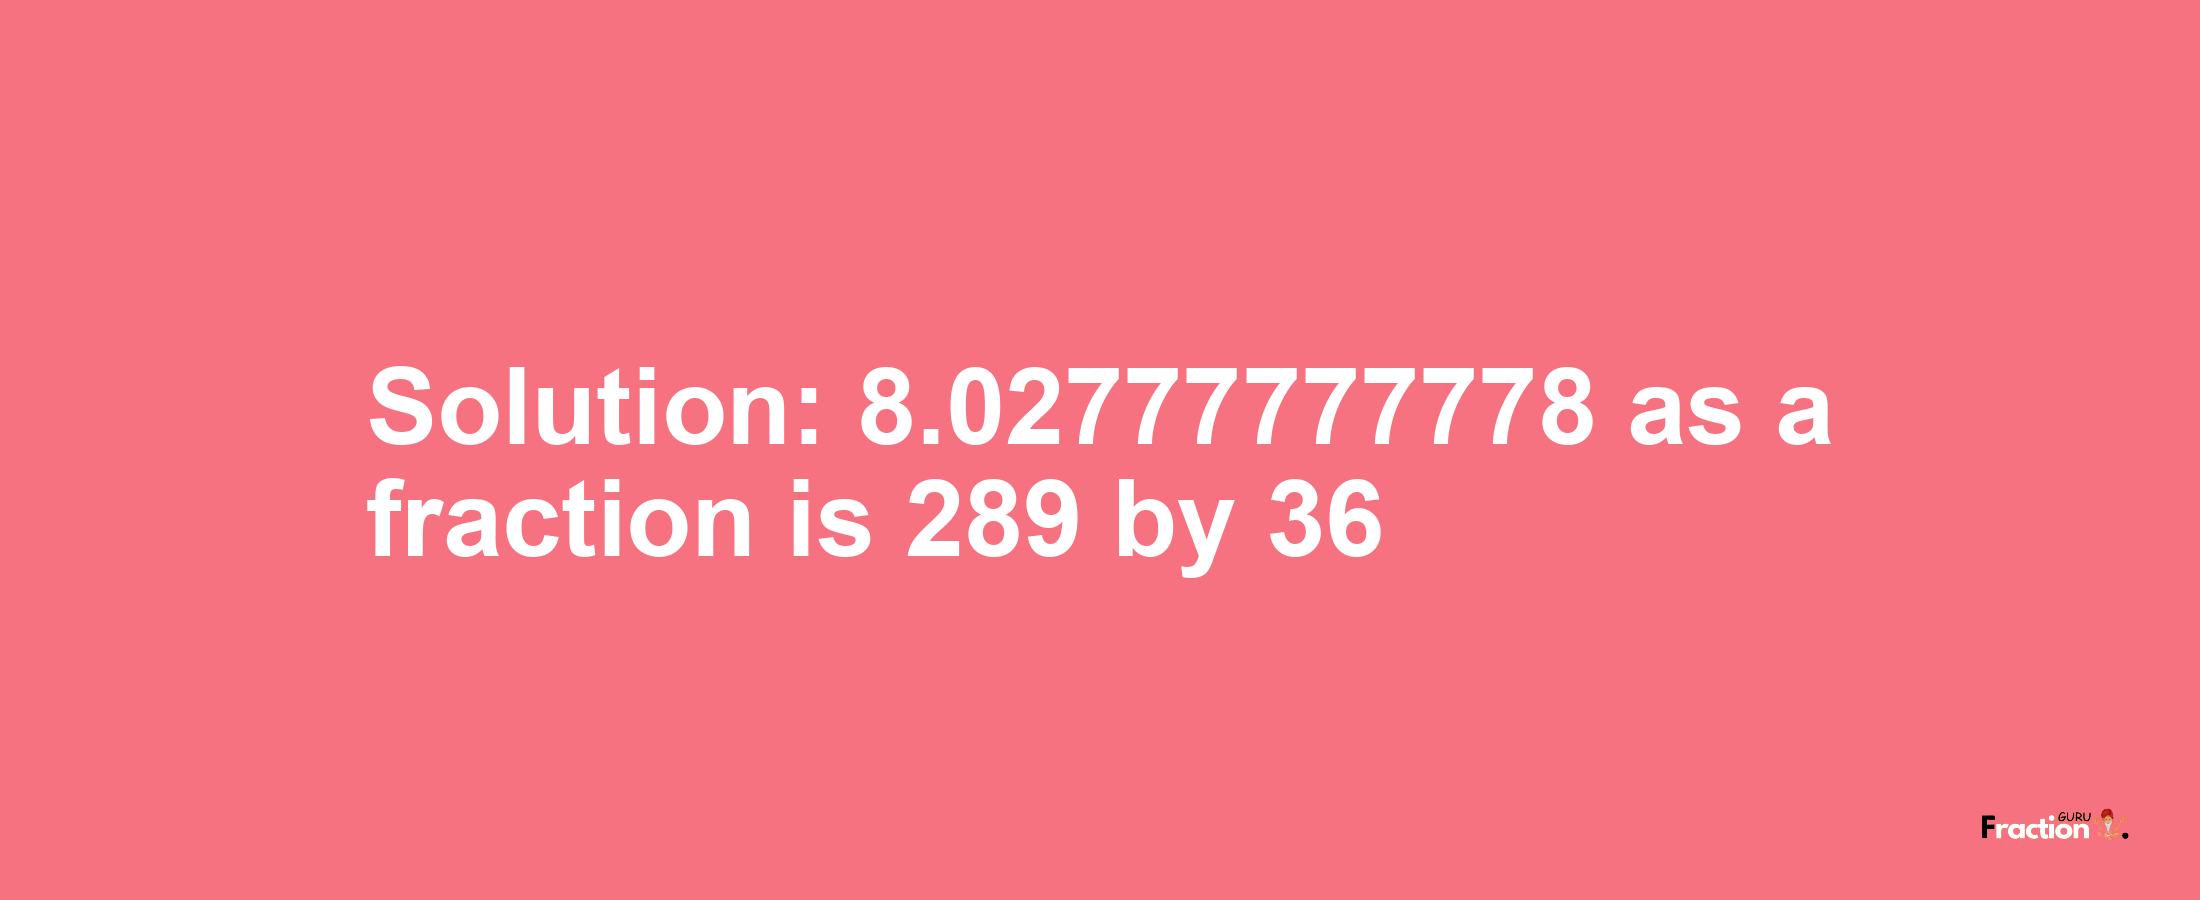 Solution:8.02777777778 as a fraction is 289/36